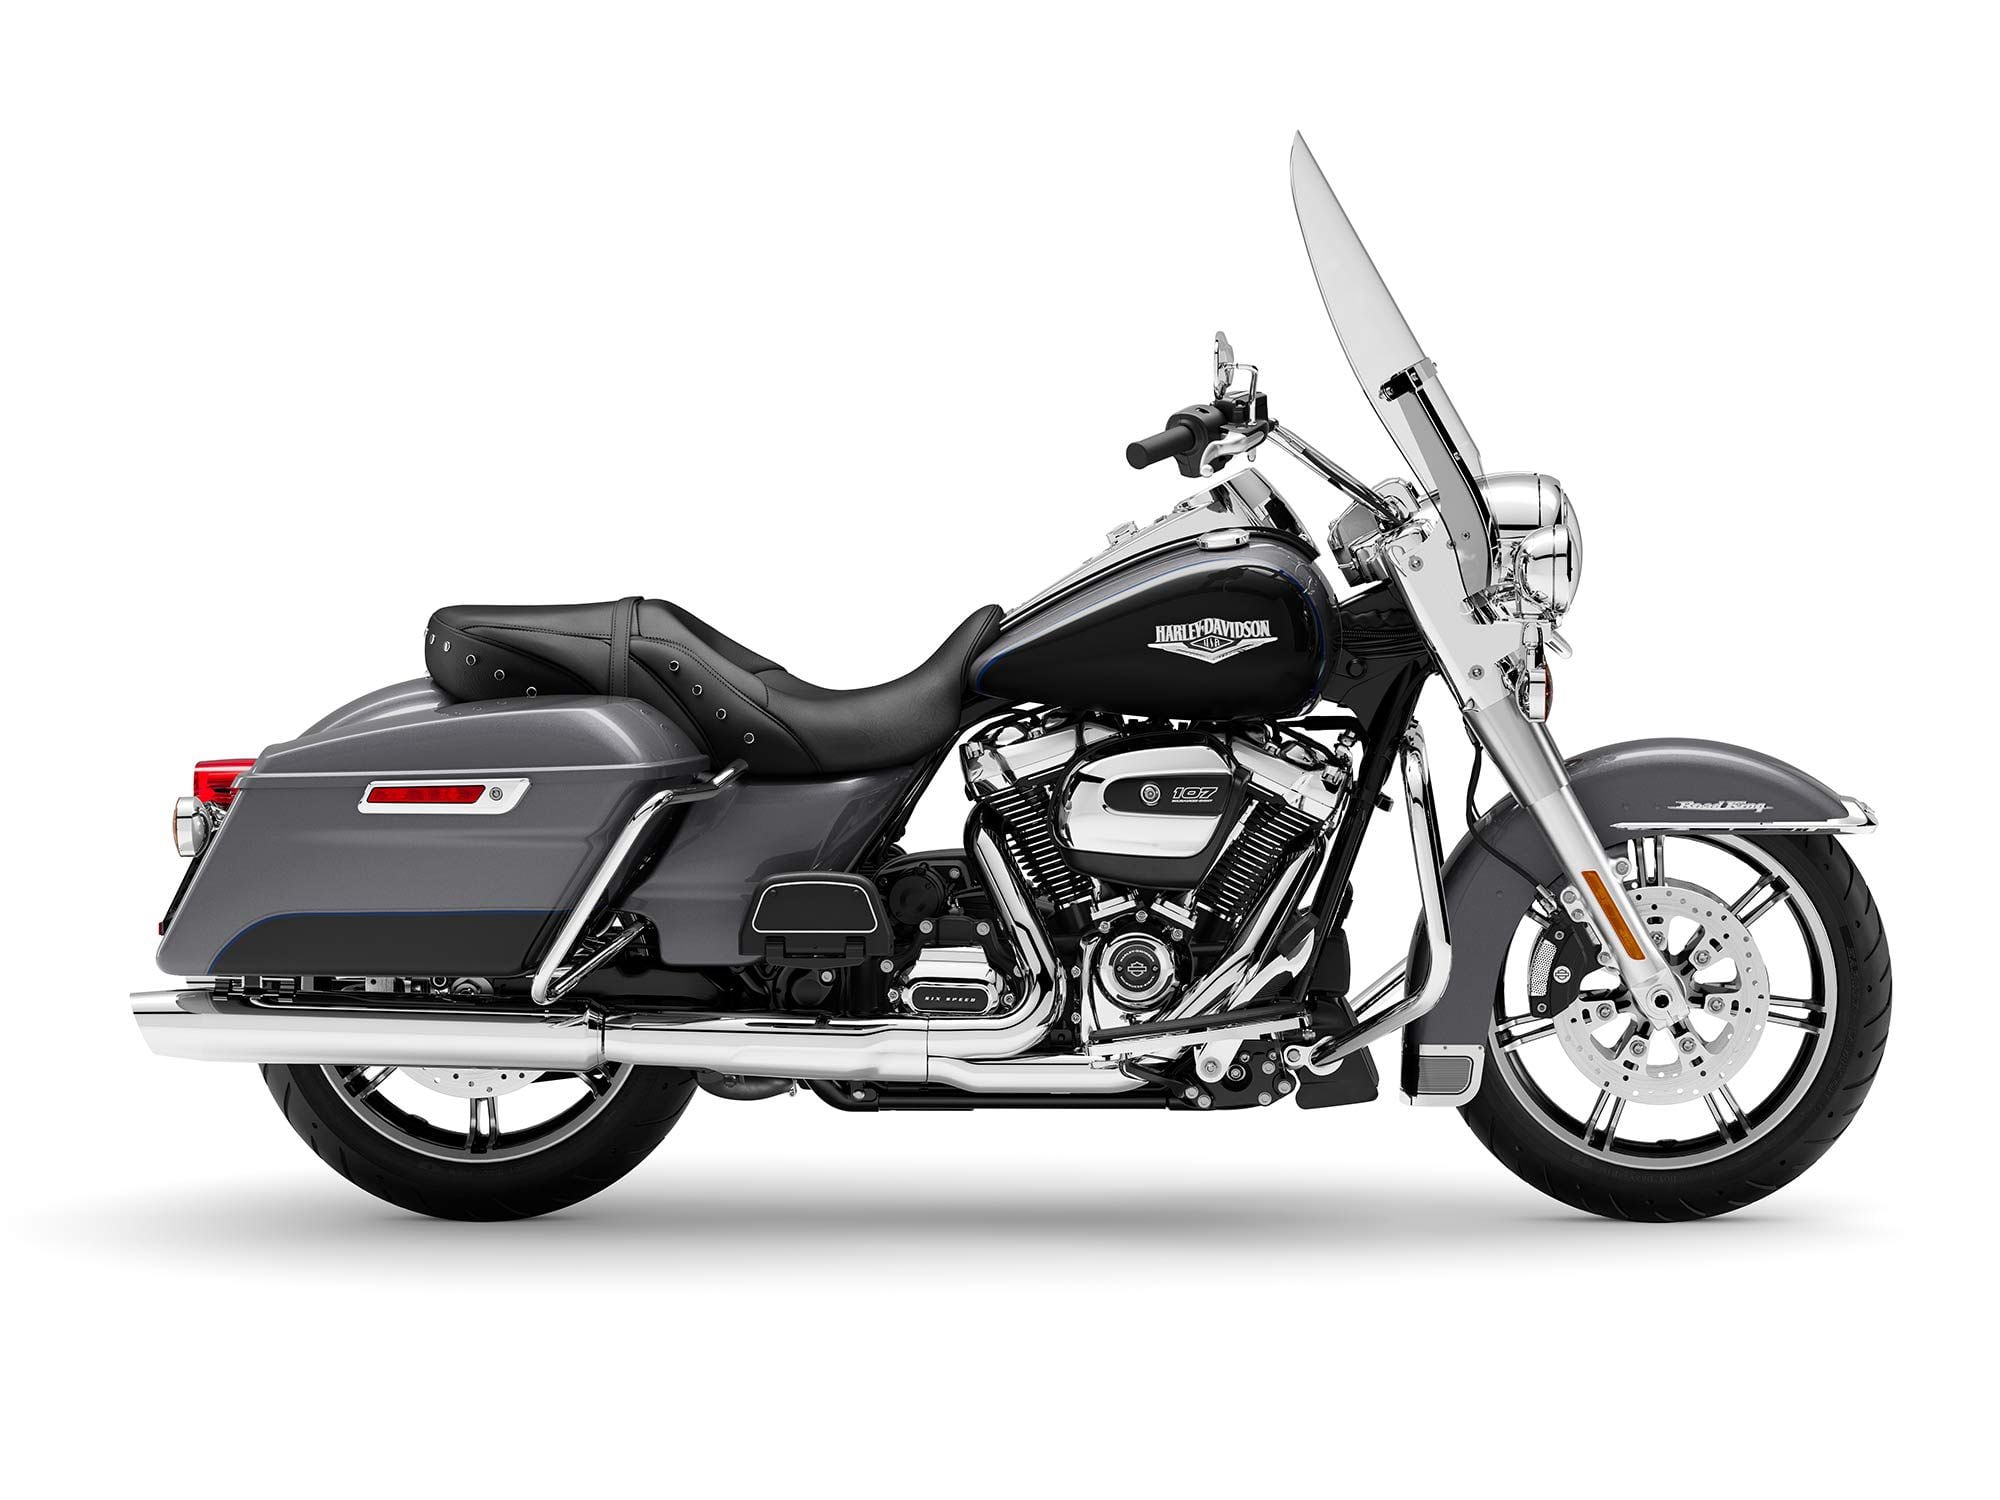 The Road King is known for its comfort on short and long hauls thanks to its wind protection.